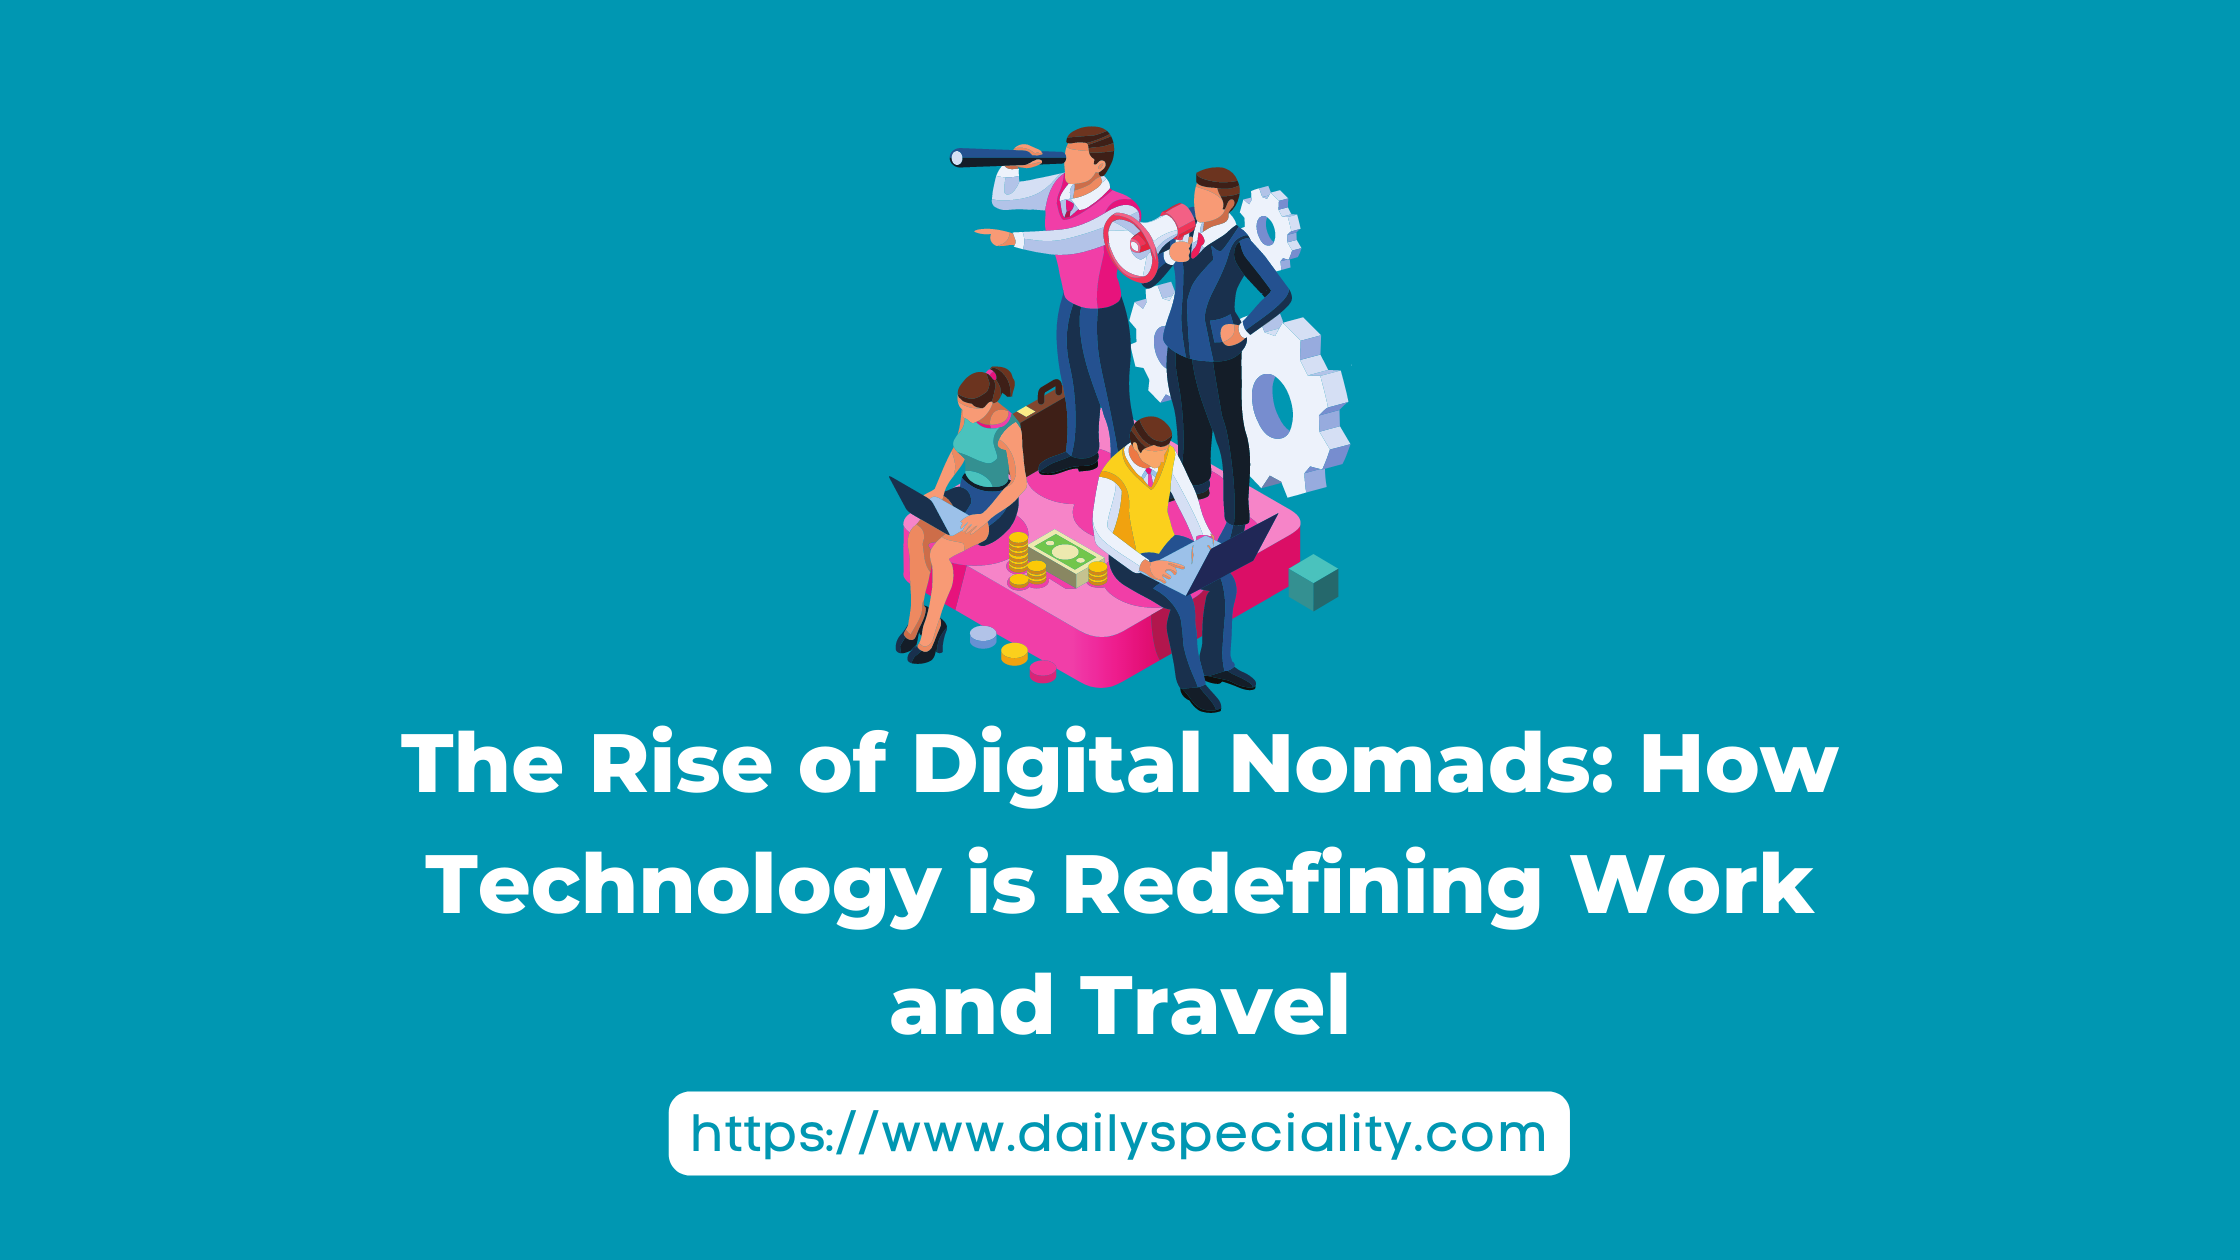 The Rise of Digital Nomads: How Technology is Redefining Work and Travel